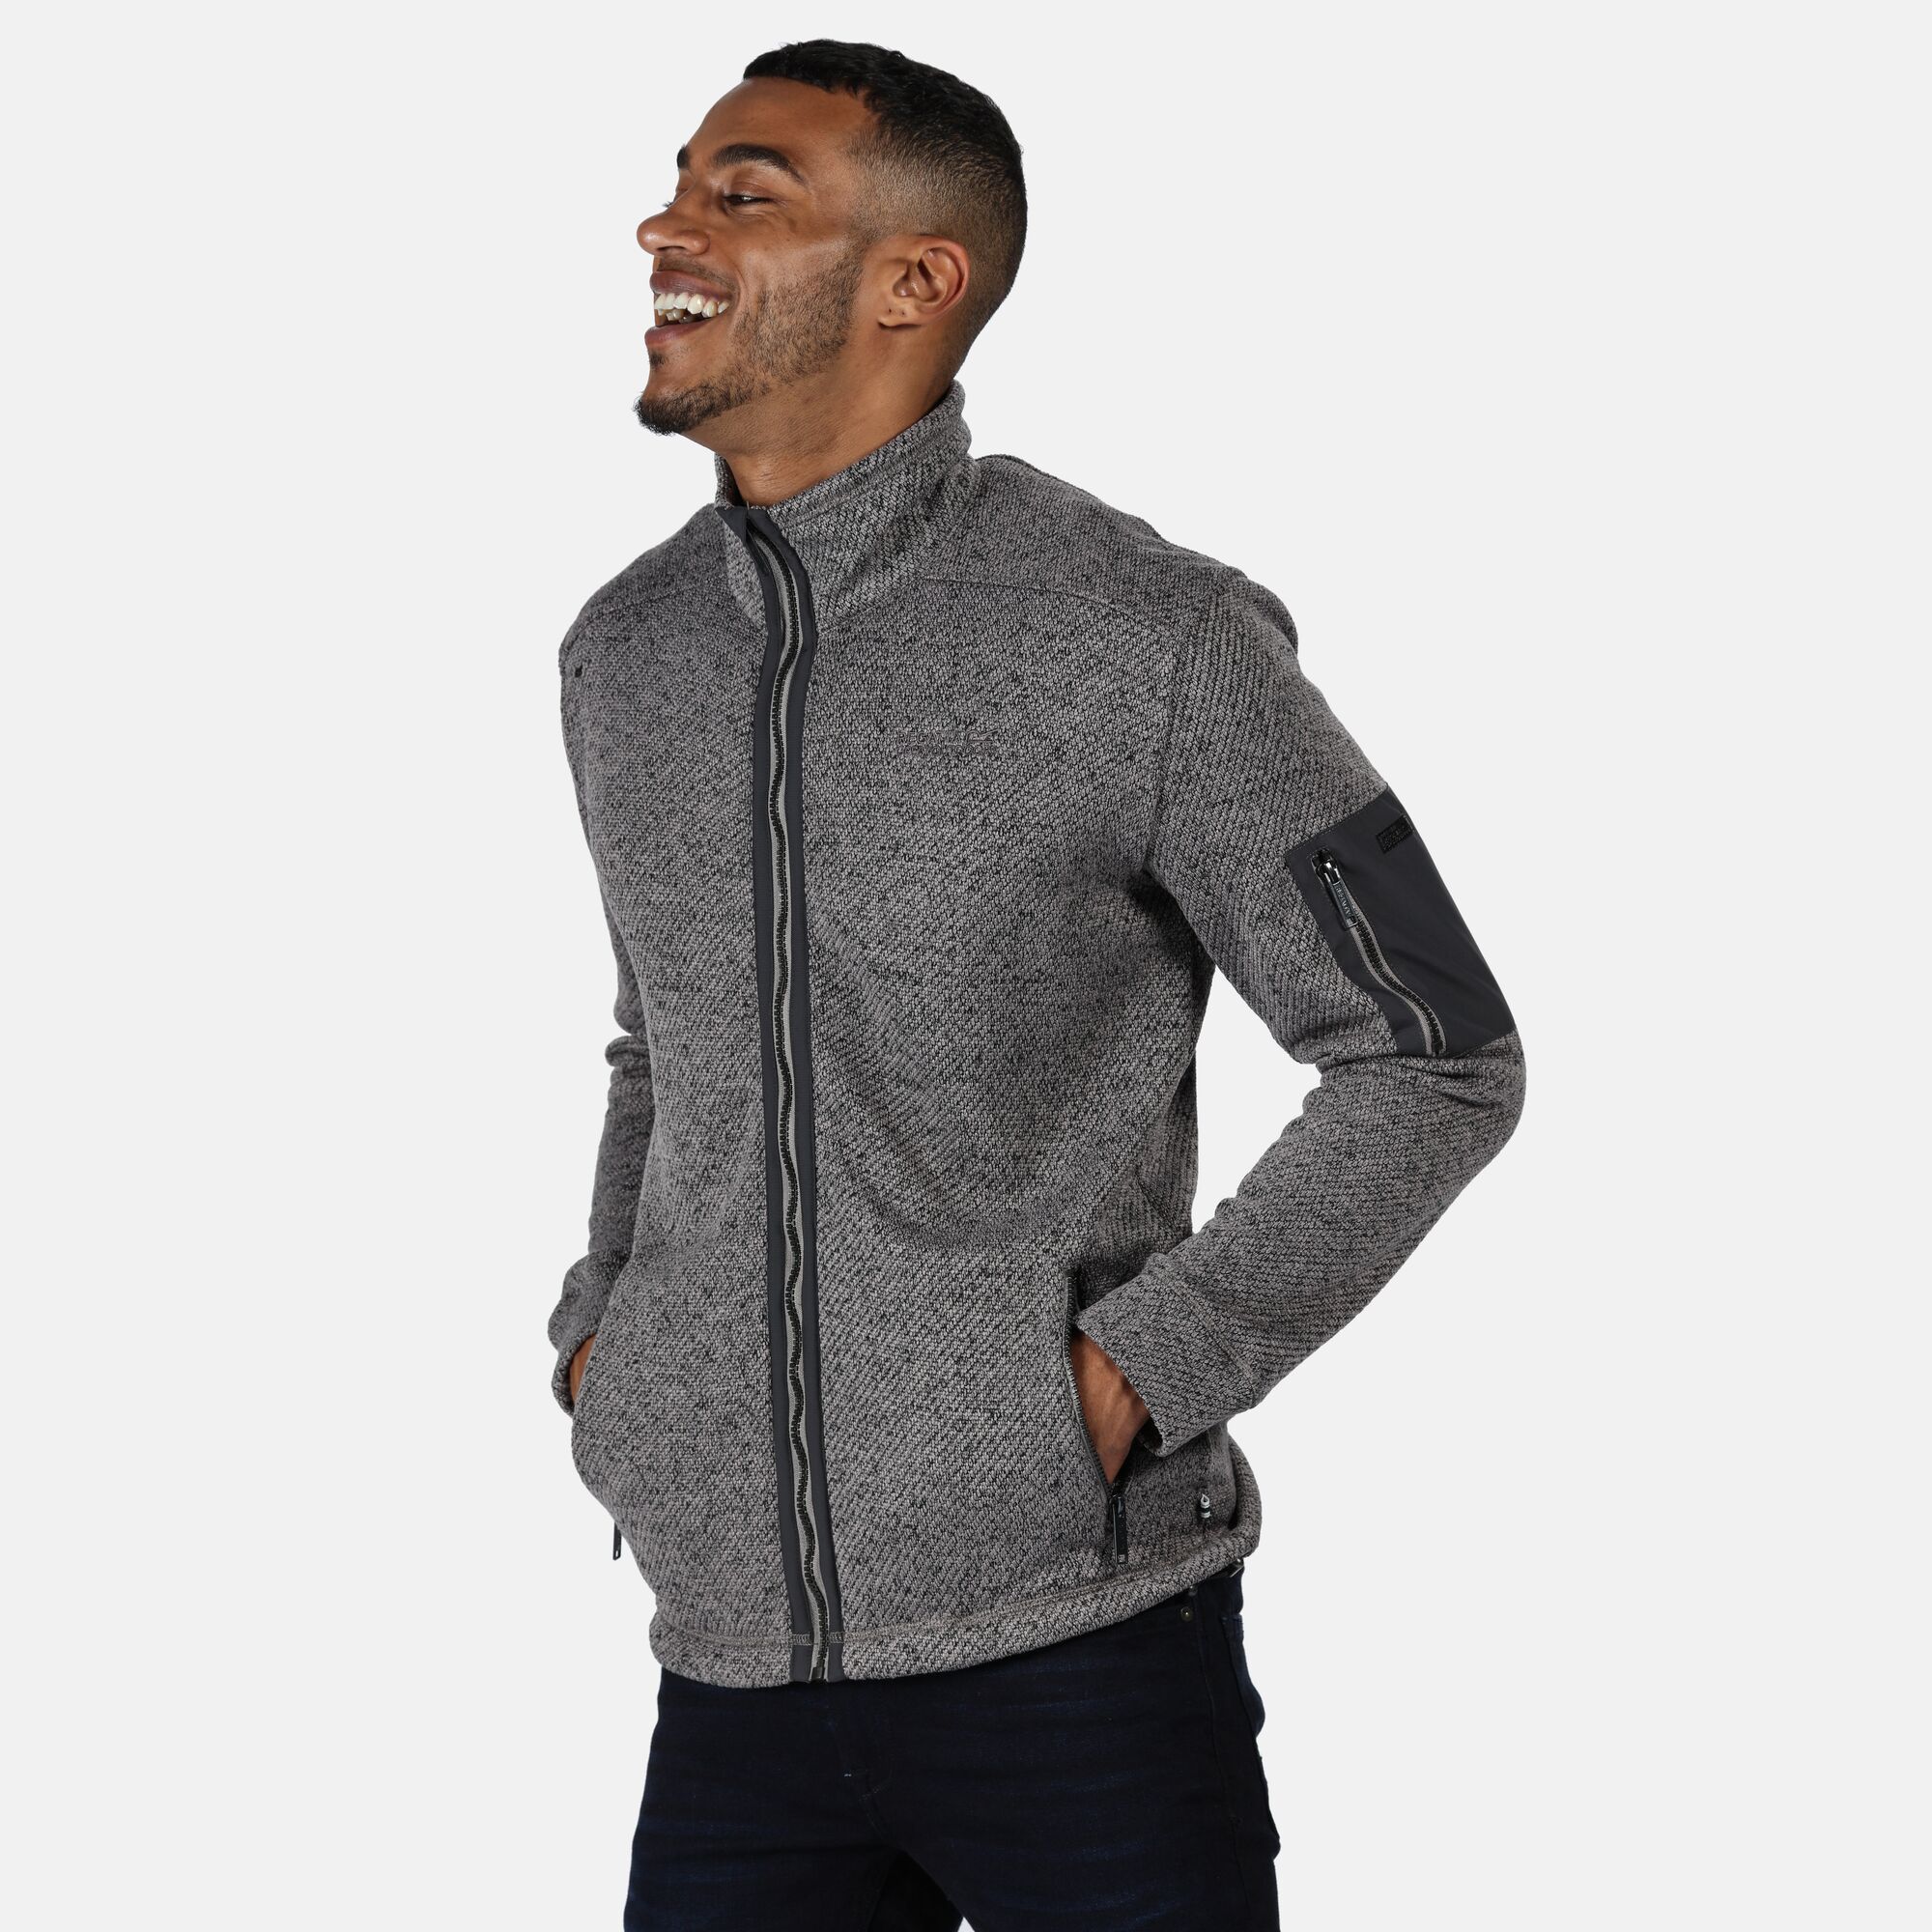 Material: 100% Polyester 245gsm diagonal knit effect fabric. Warm, soft and lightweight fleece with sleeve pocket. 2 lower zipped pockets. Breeze-blocking stand collar. Regatta outdoors logo badge on left sleeve.